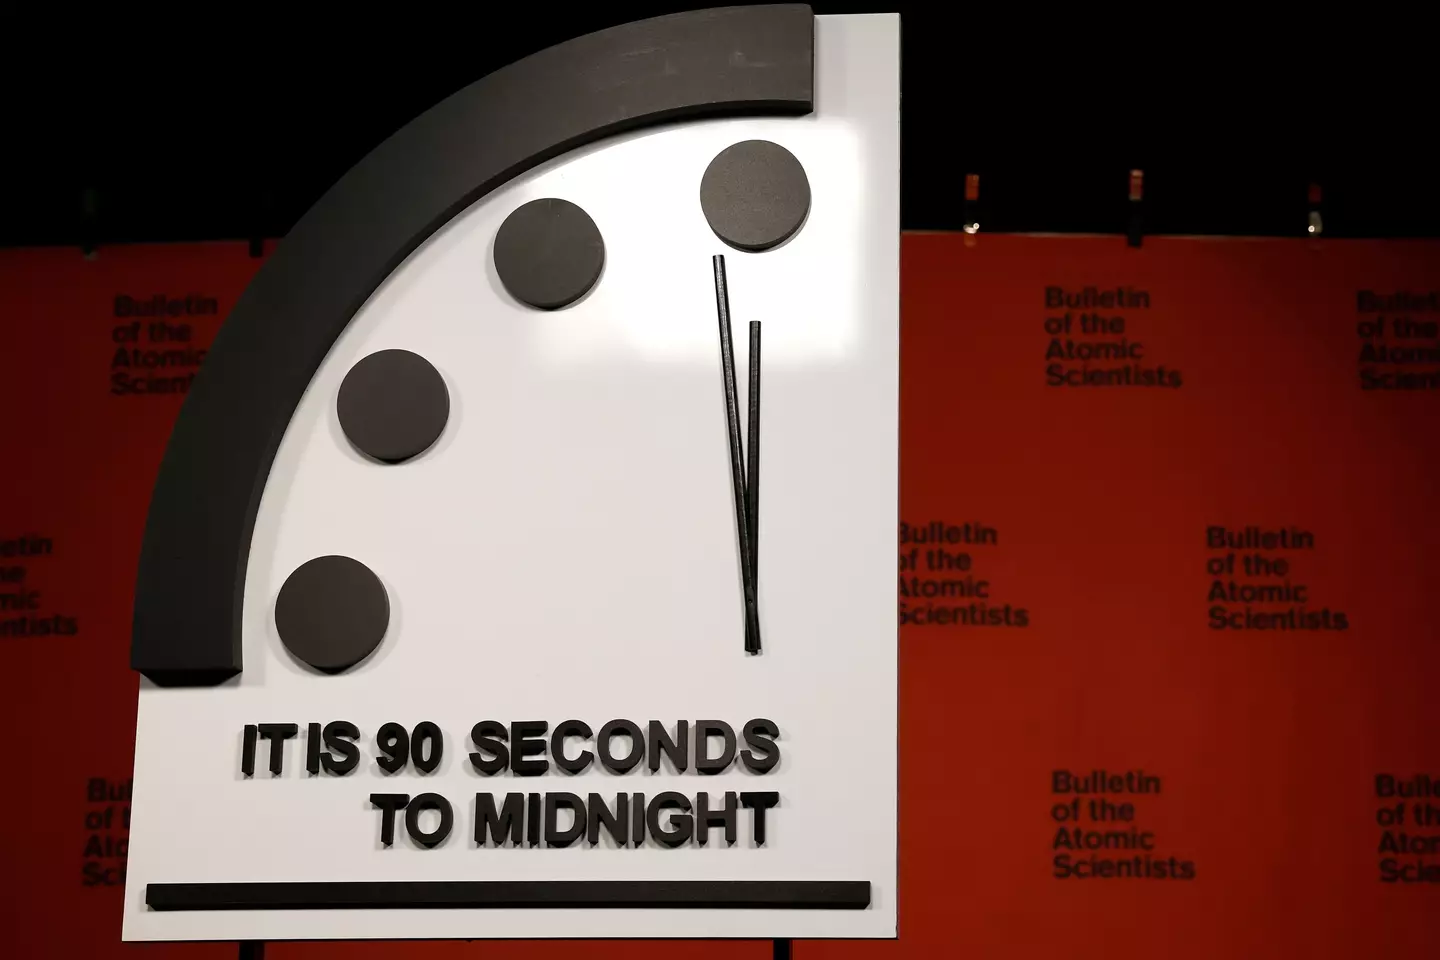 The Doomsday Clock currently sits at 90 seconds to midnight.